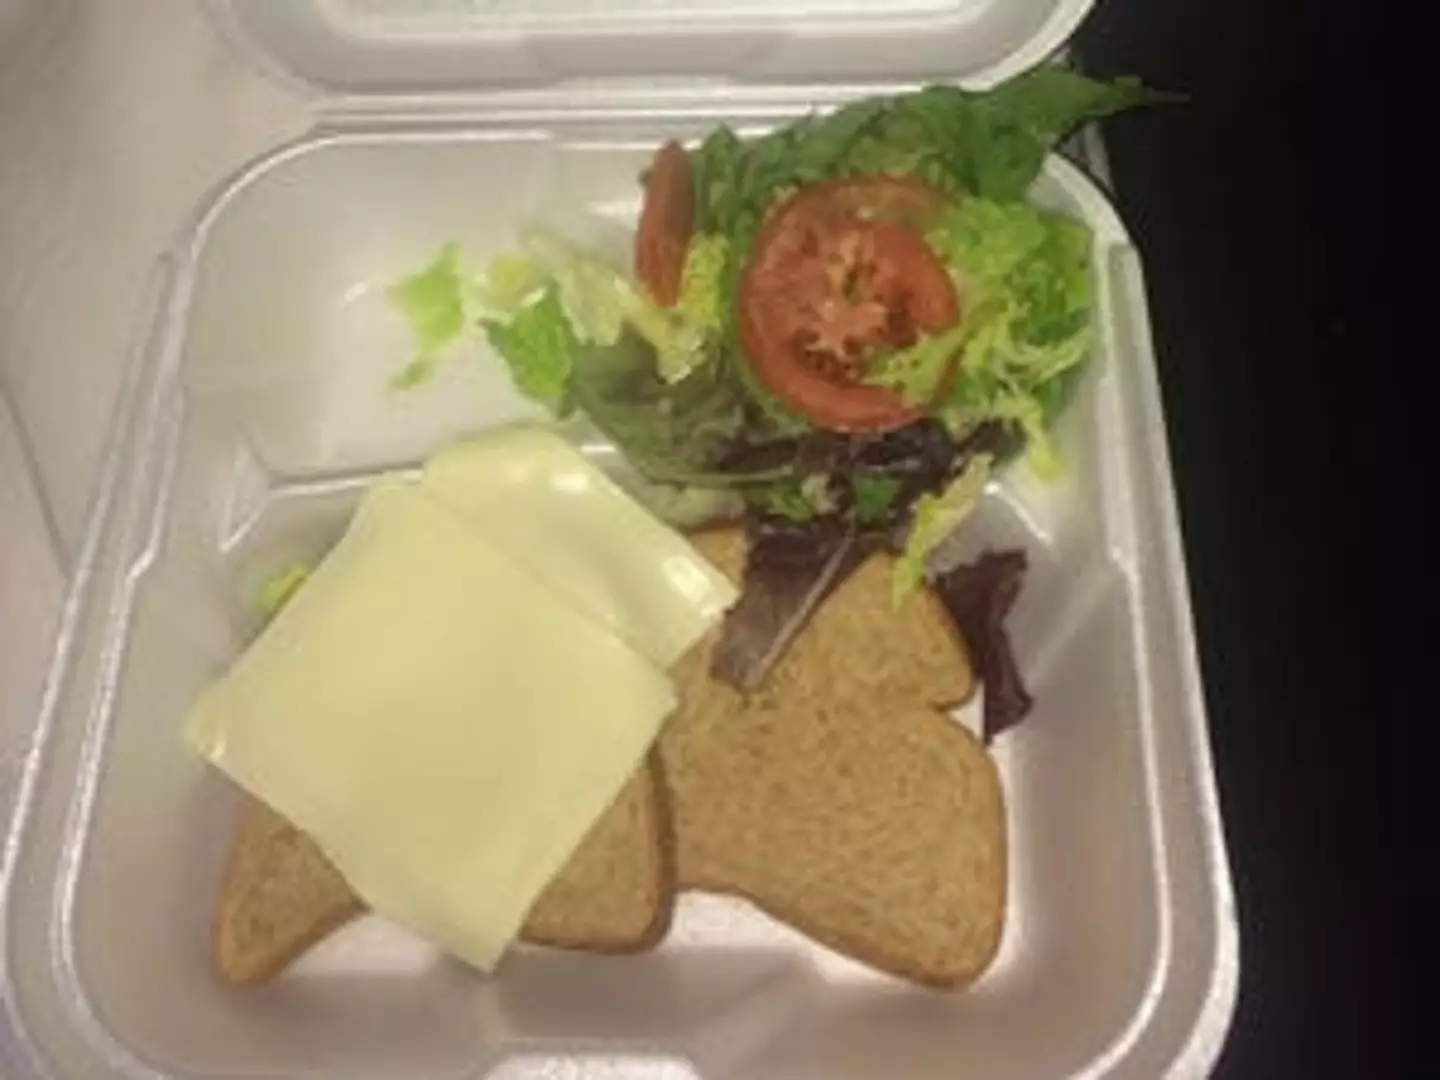 People compared it to the food received at the Fyre Festival. (